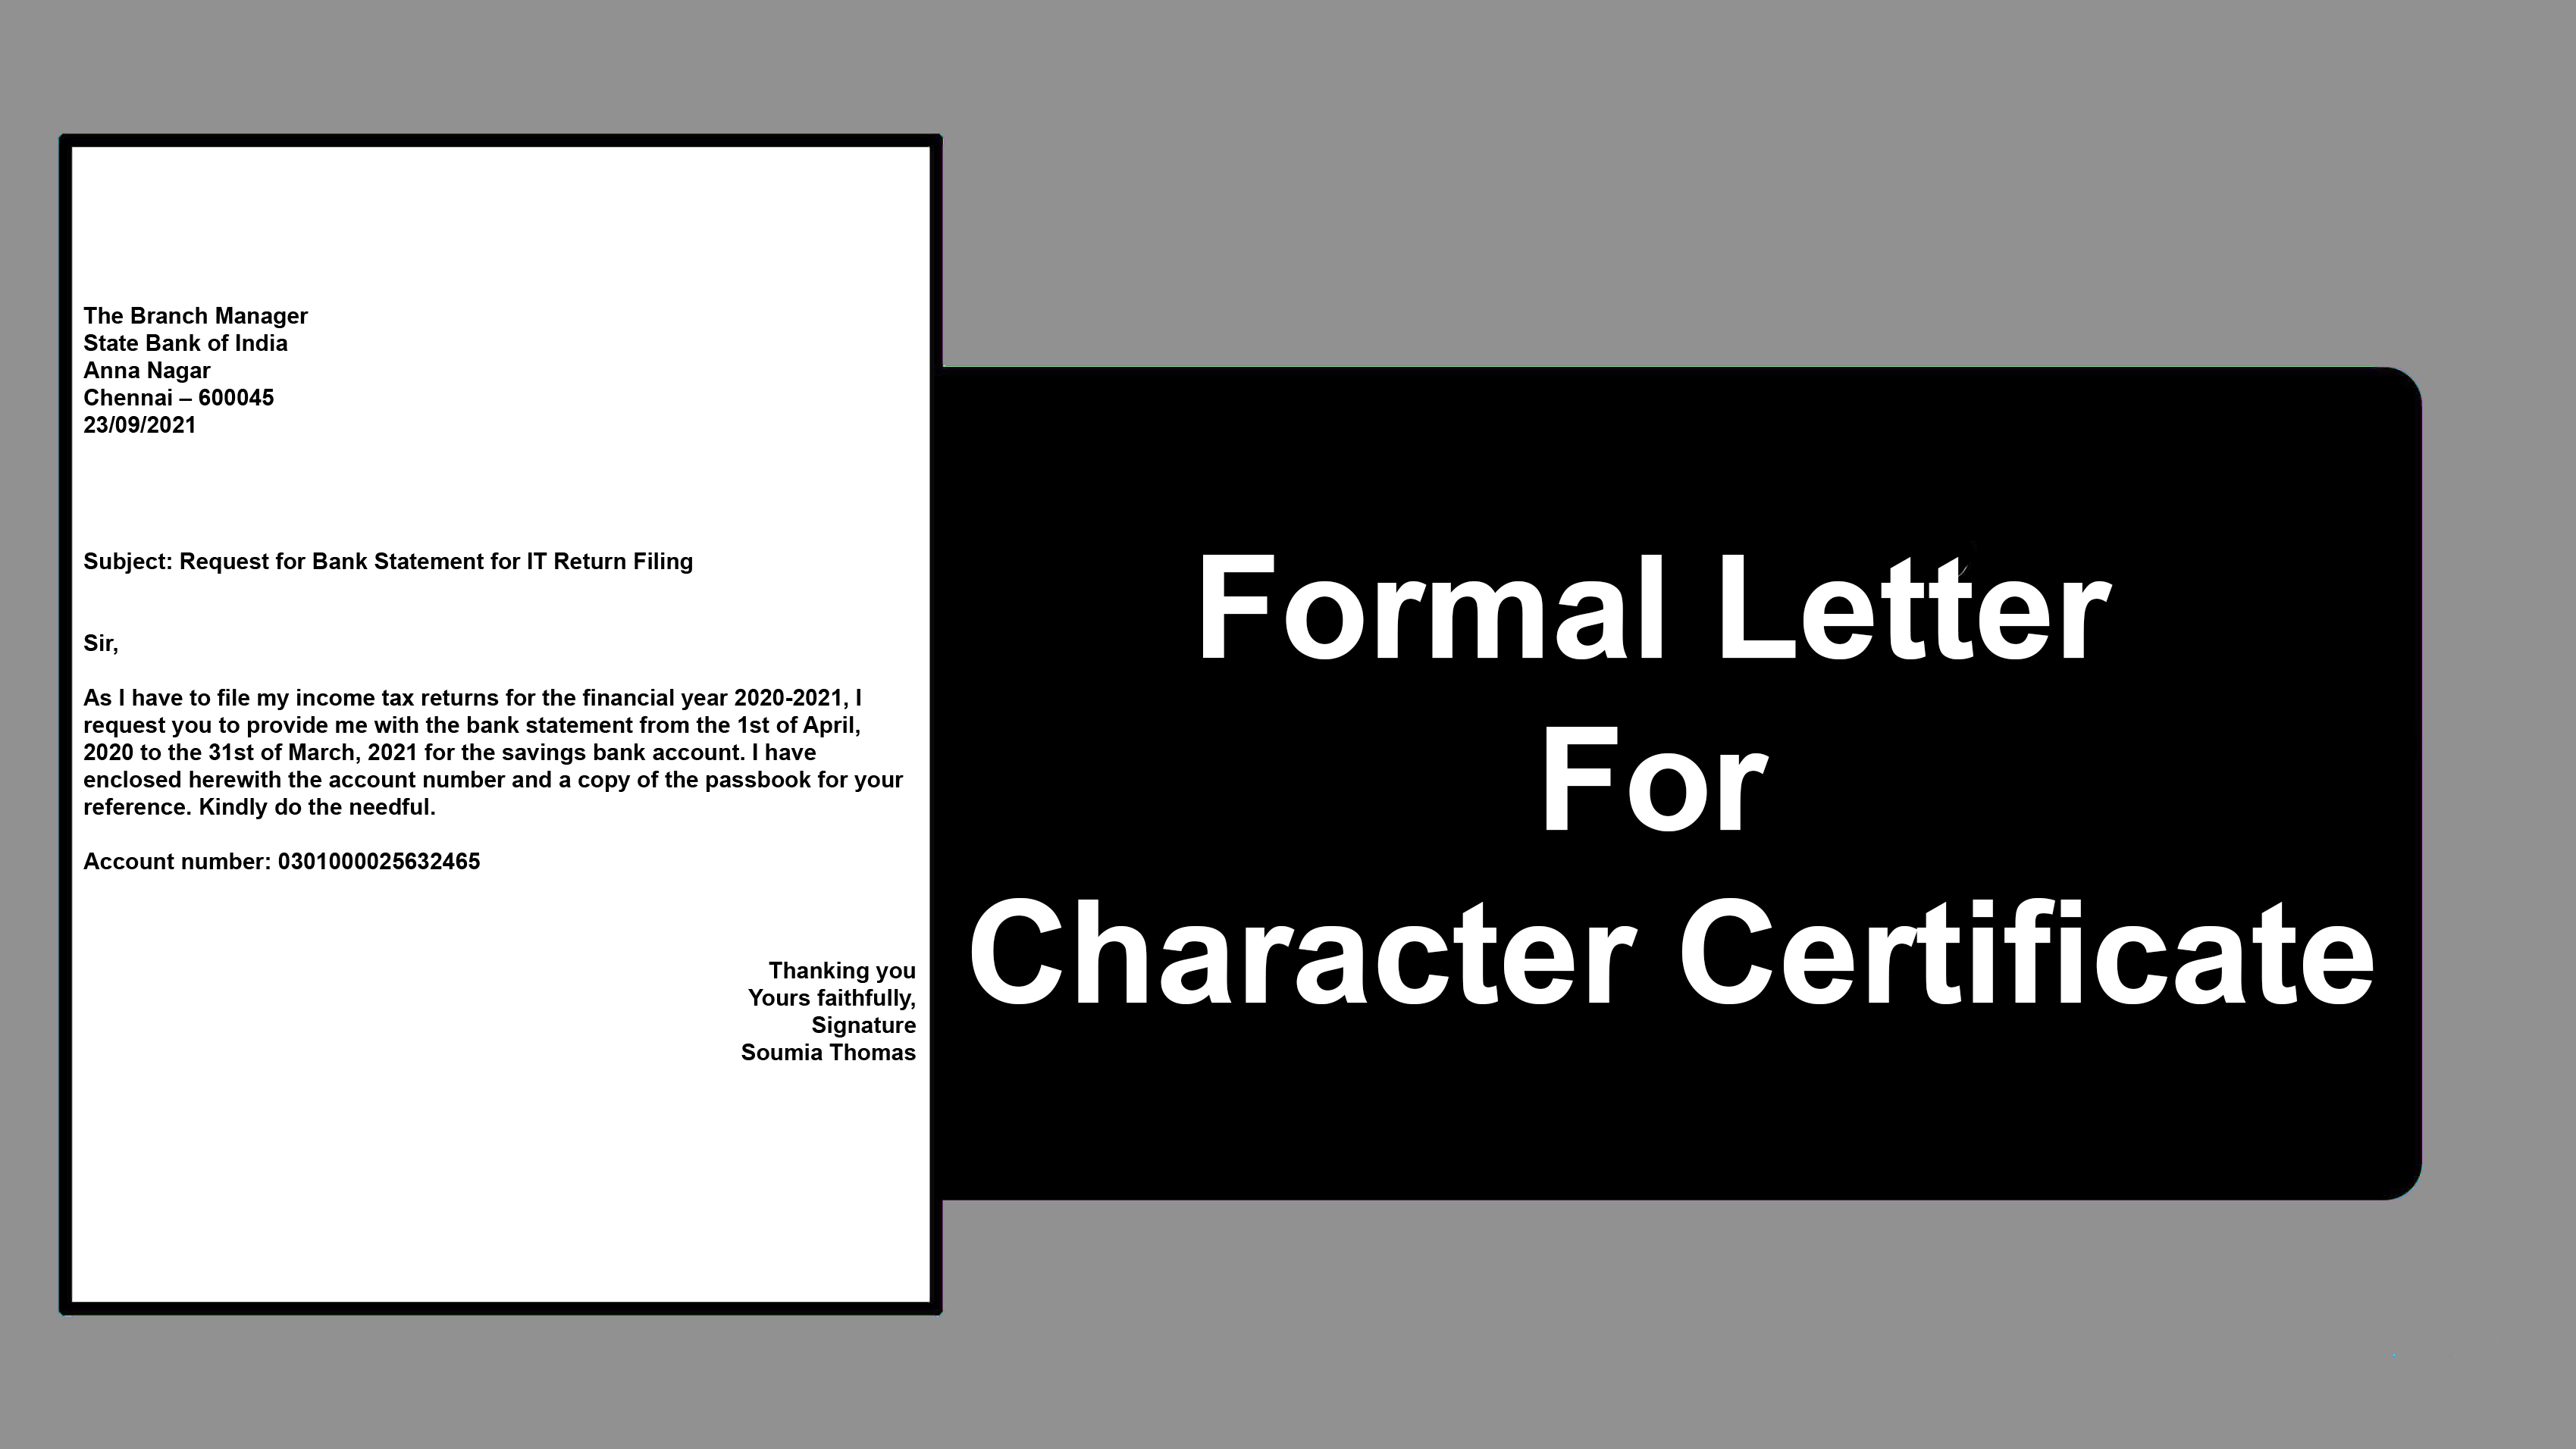 Formal Letter format For Character Certificate